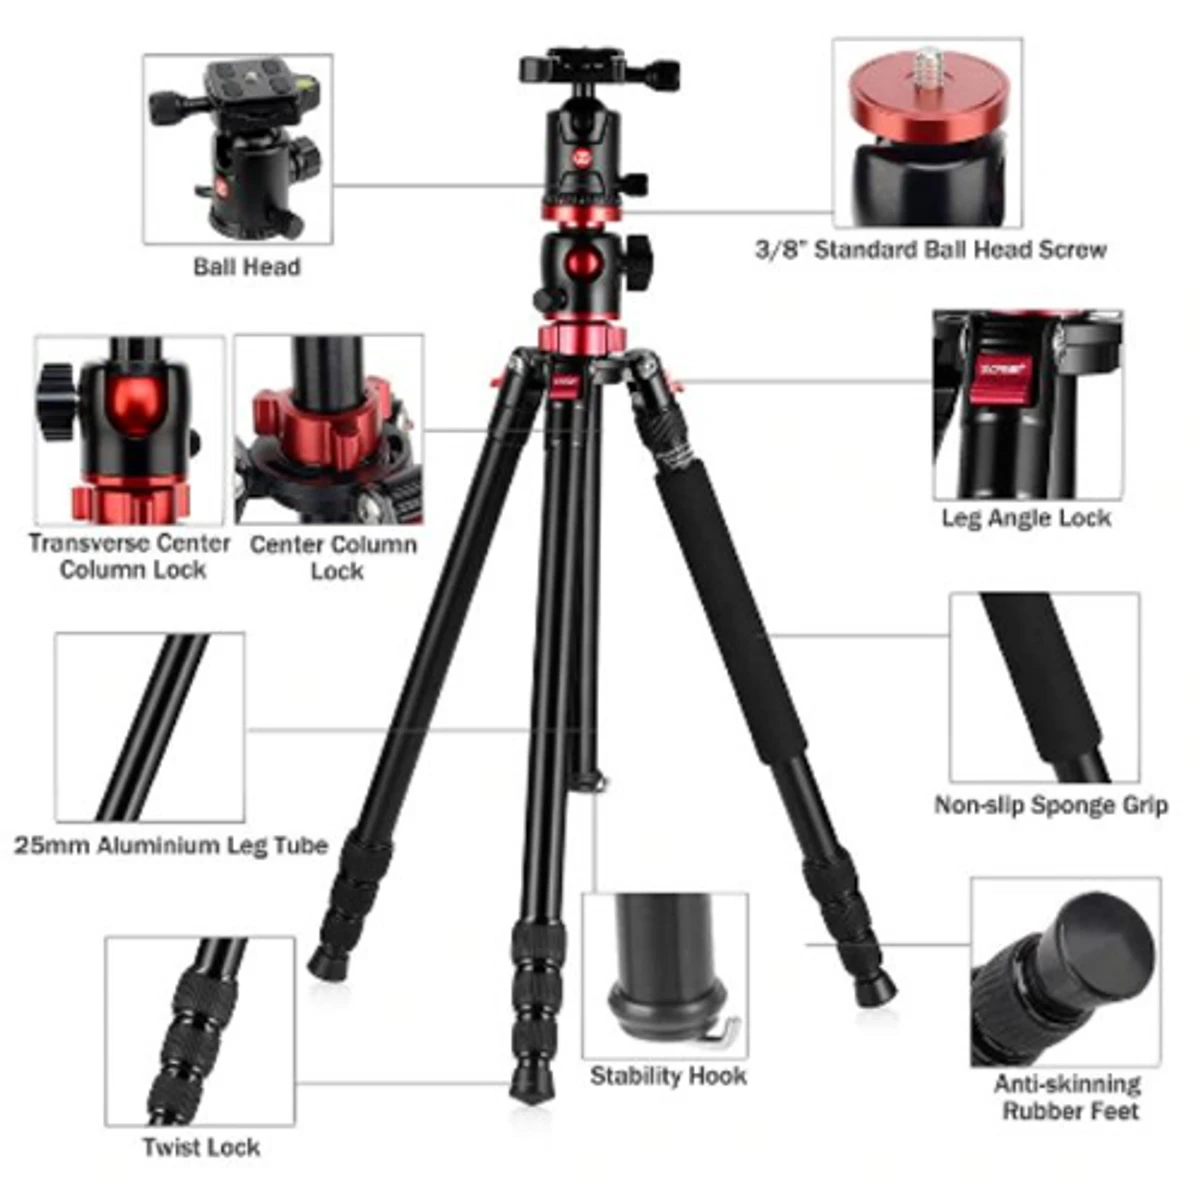 Zomei M8 Professional Camera Tripod And Overhead Gear With 72-Inch Extension Arm Monopod